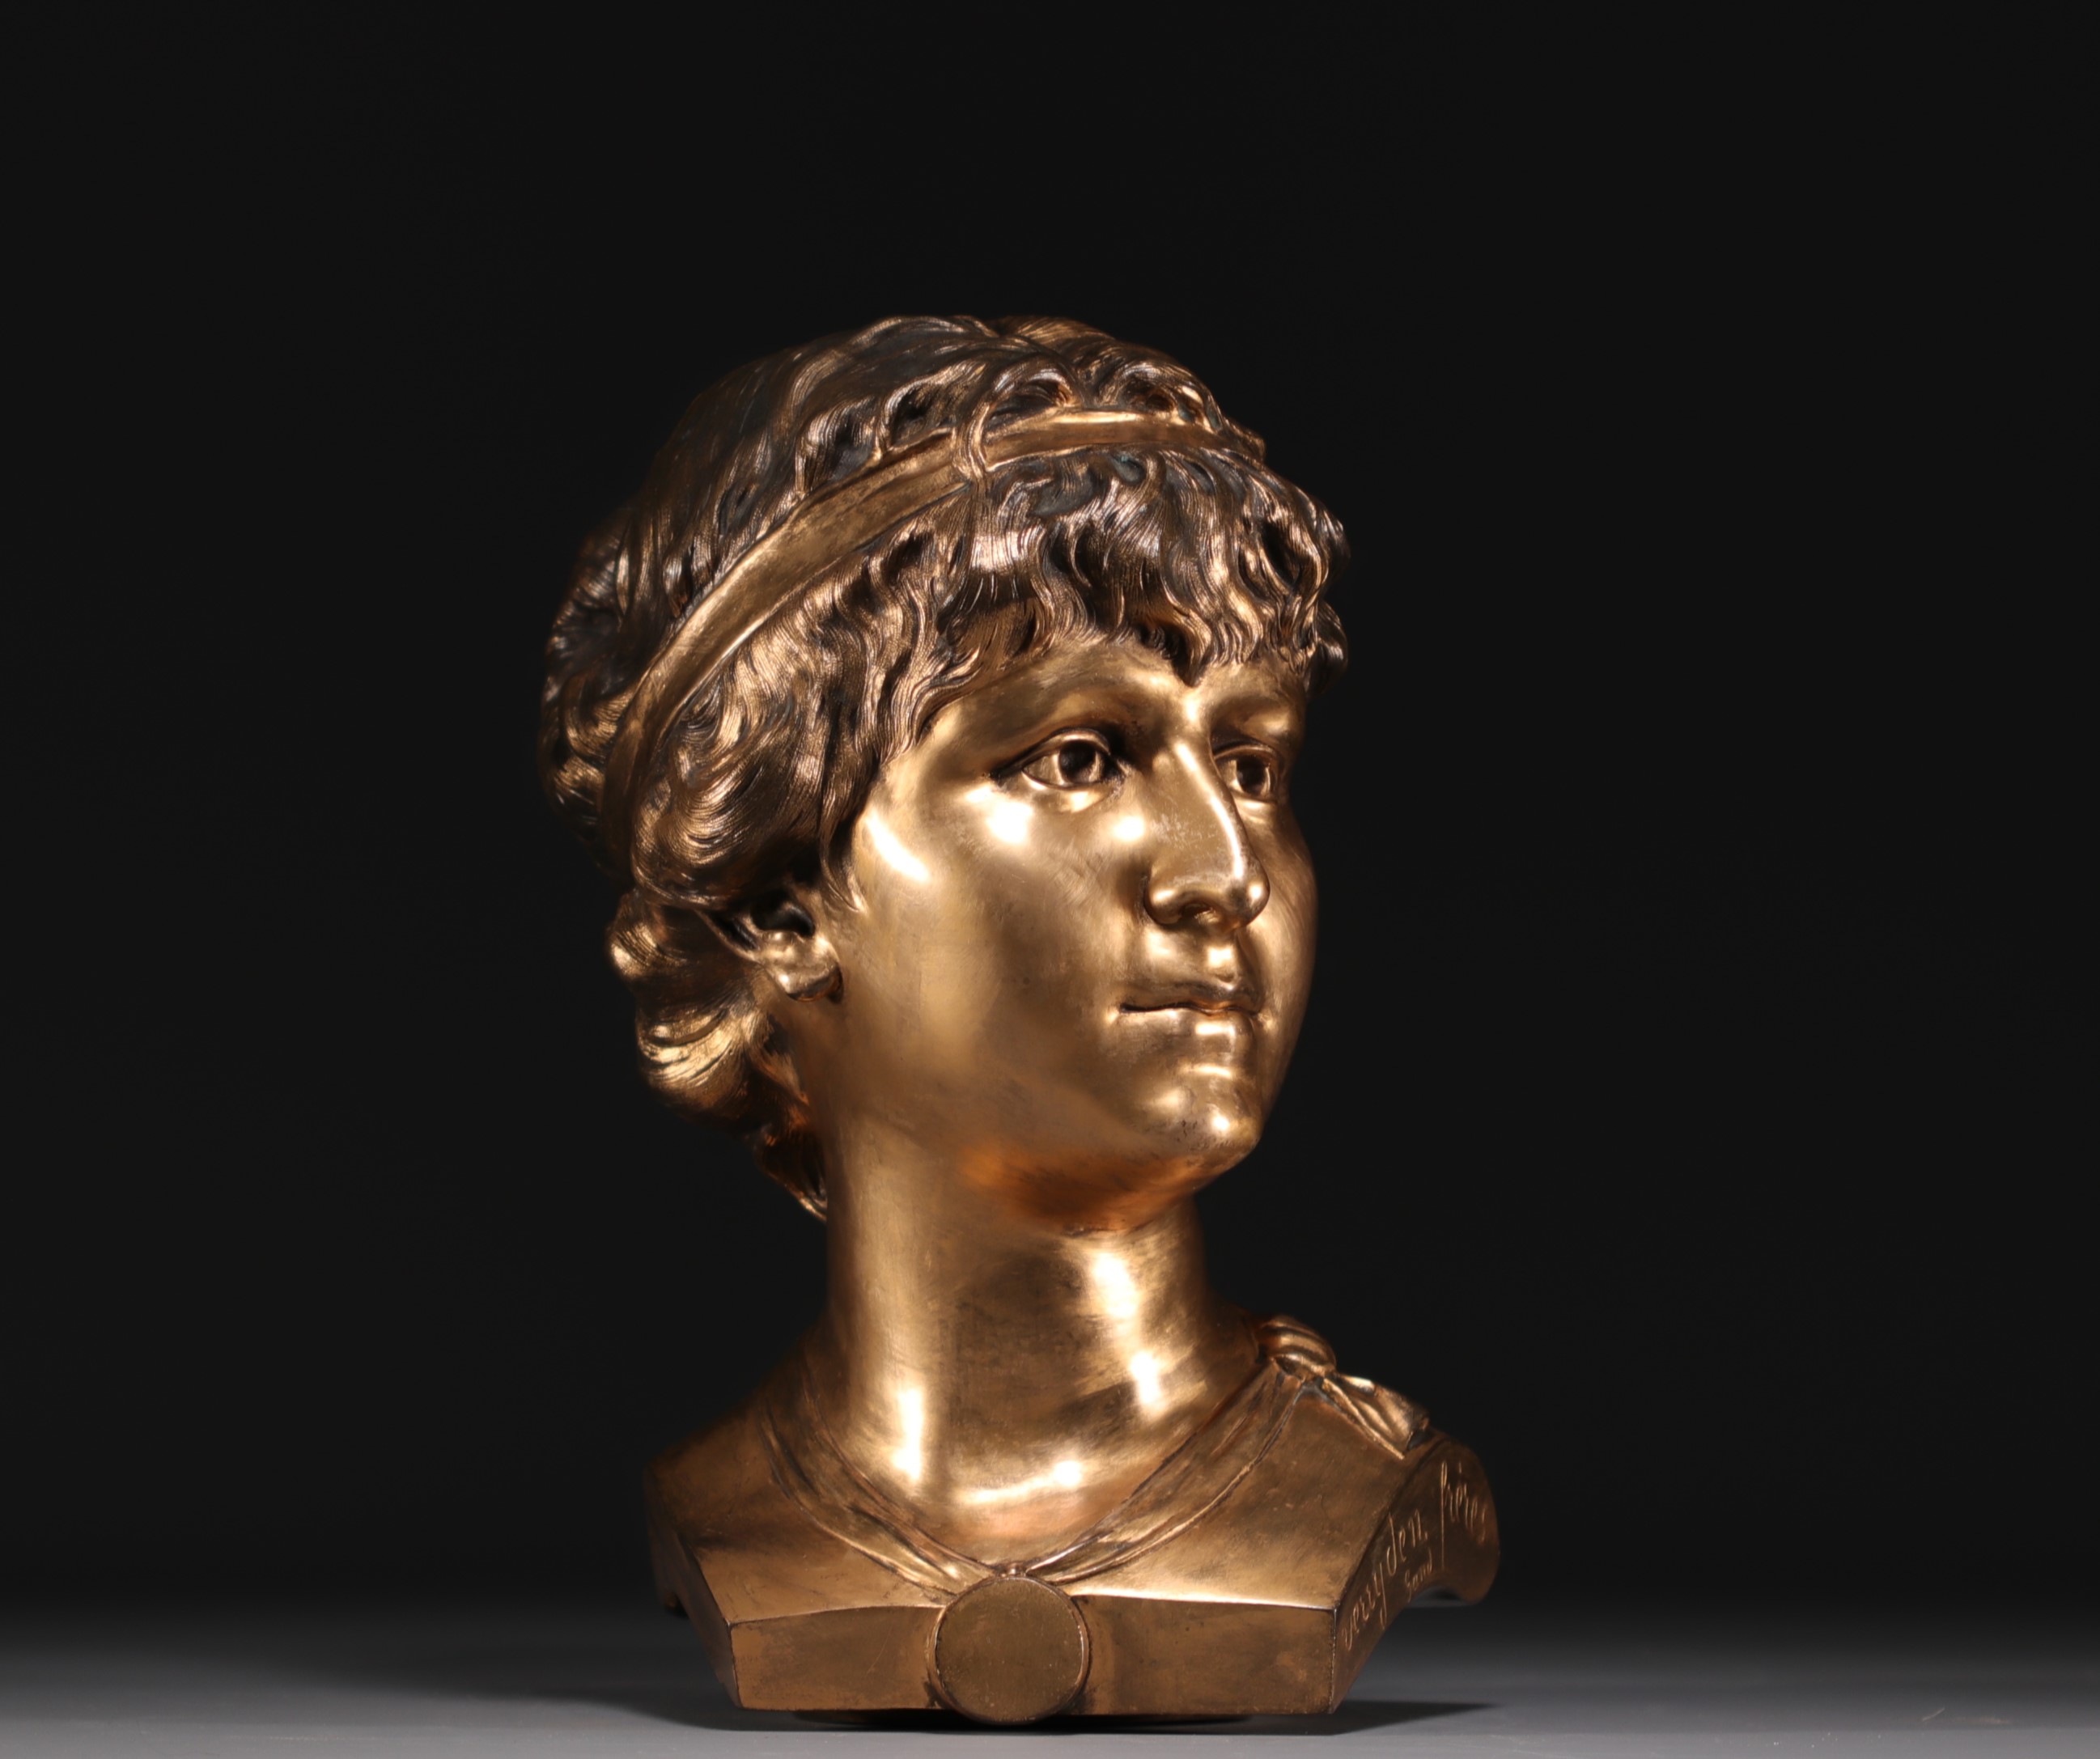 VERRYDEN Freres Gand - Bust of a young man in gilded bronze. - Image 3 of 4